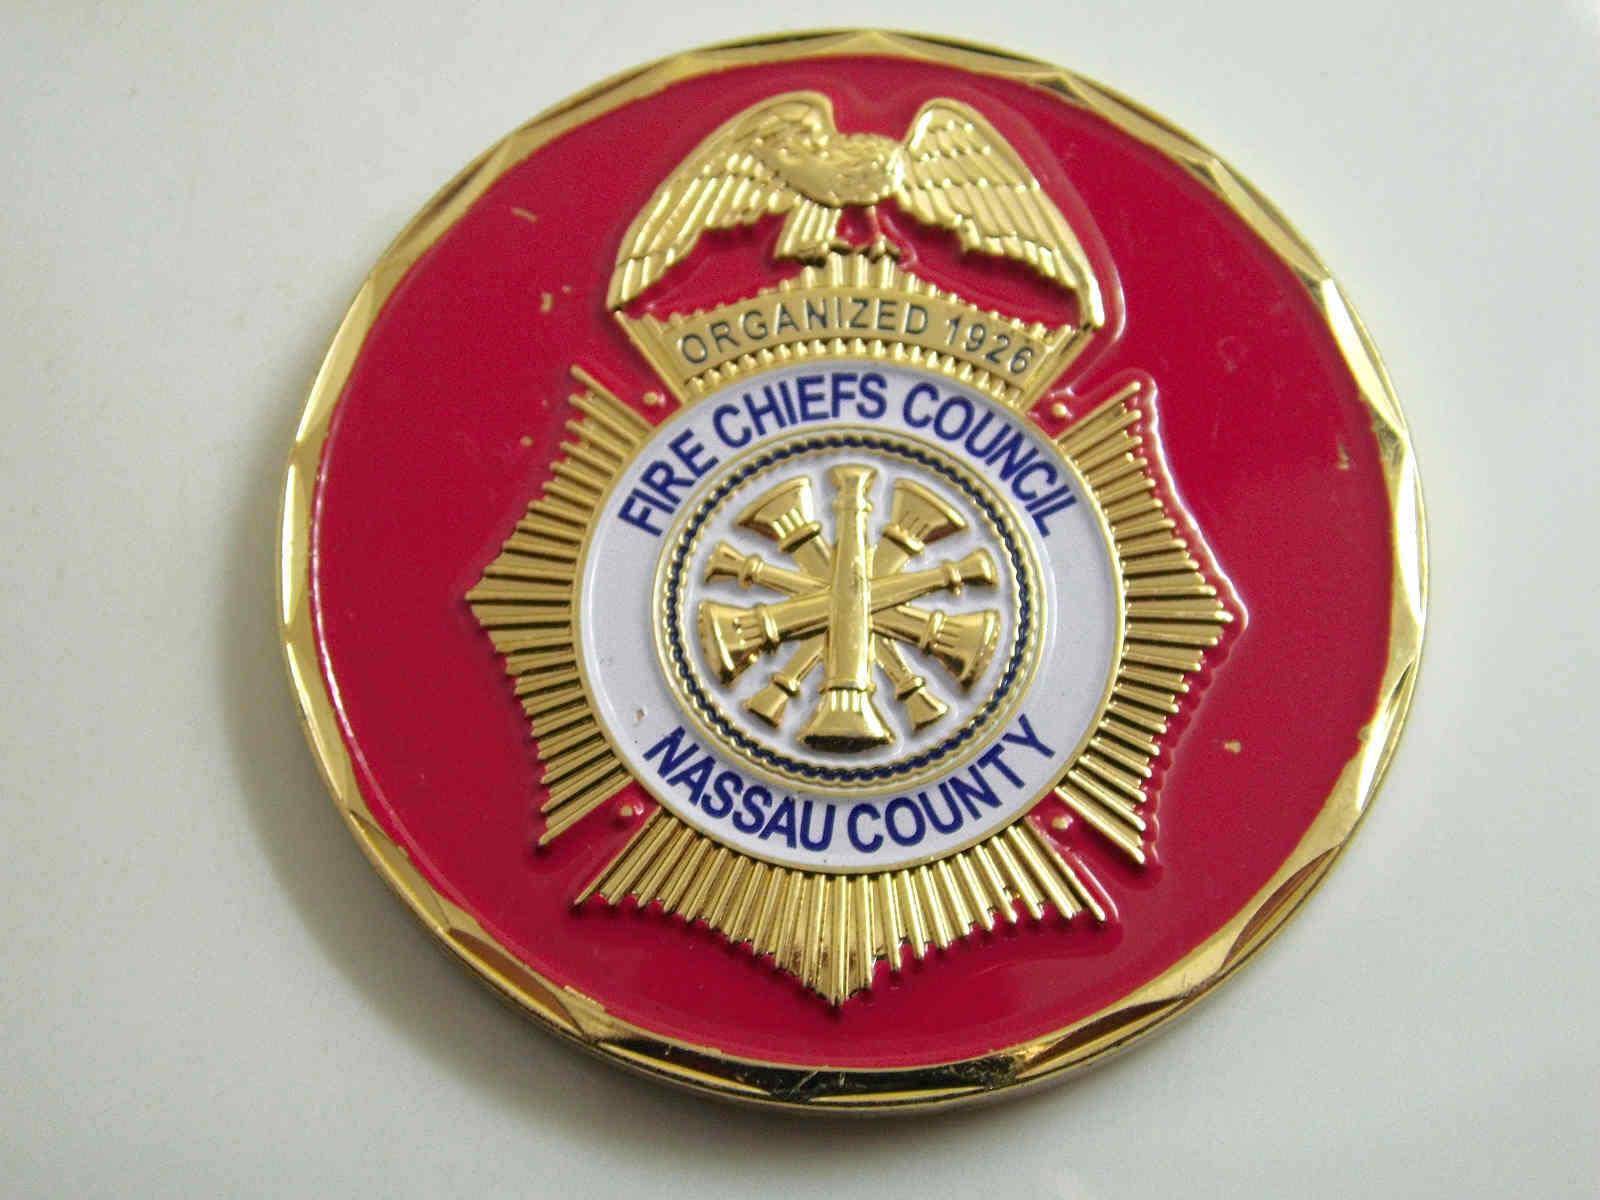 FIRE CHIEFS COUNCIL NASSAU COUNTY ORGANIZED CHALLENGE COIN